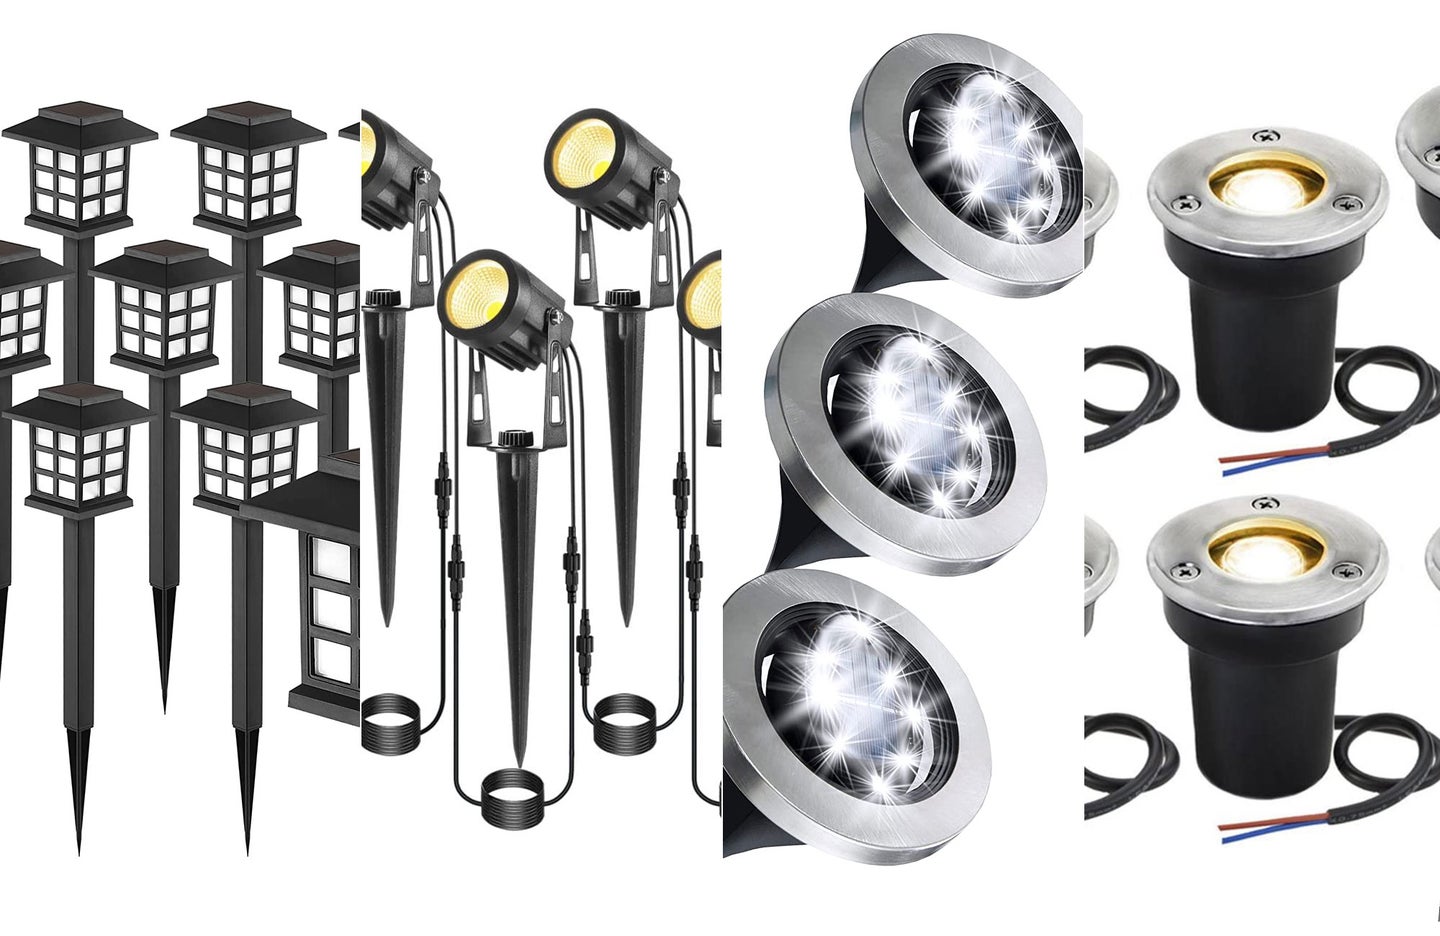 The best LED patio lighting kits composited